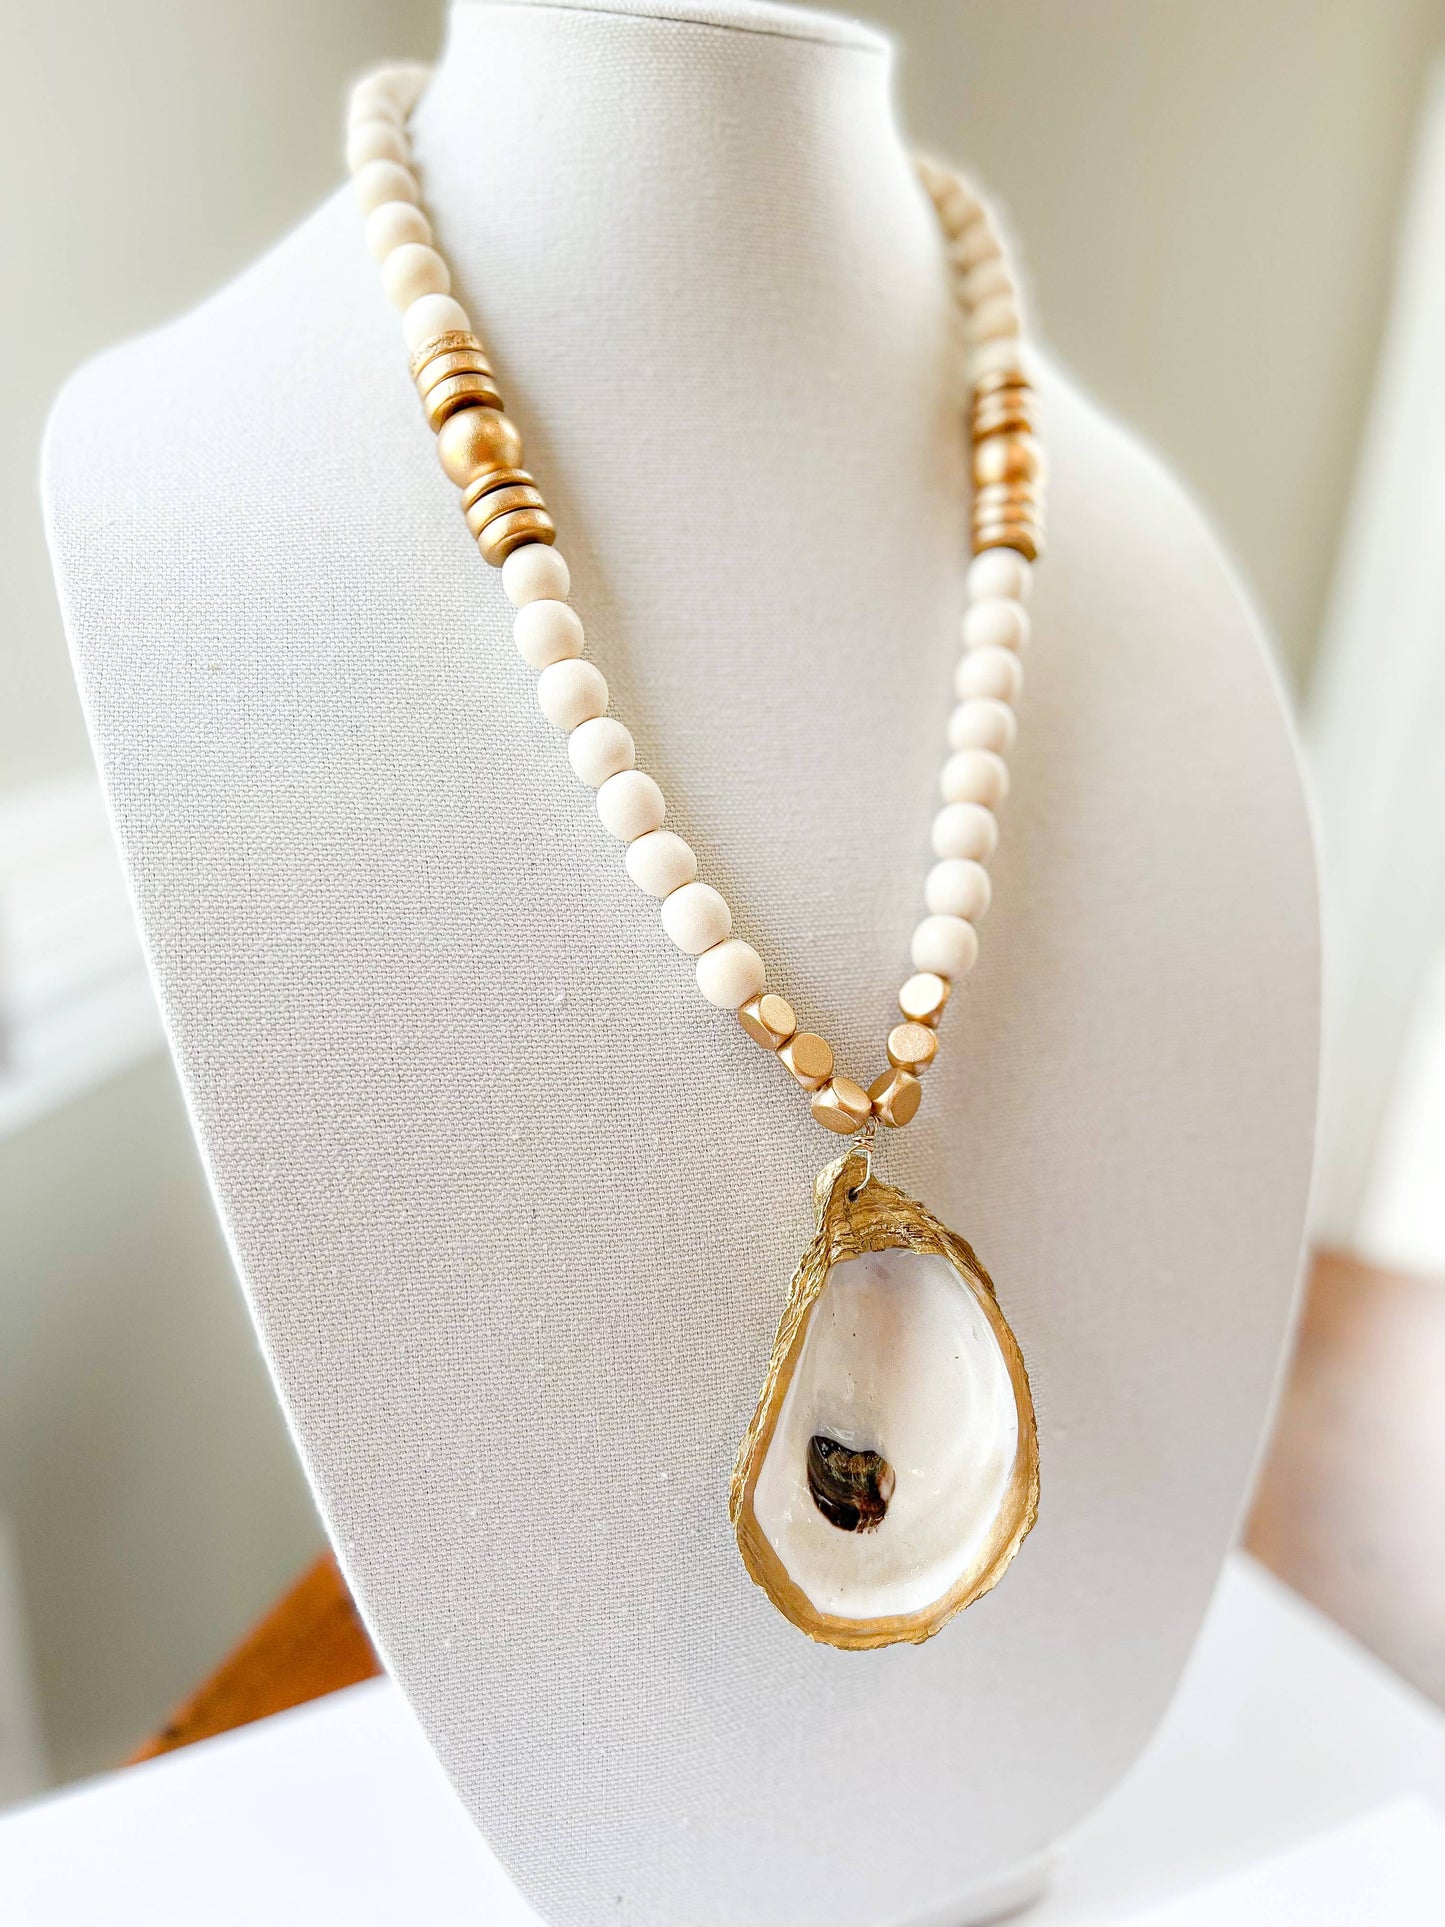 KyleLauren - Neutral white and Gold Oyster necklace